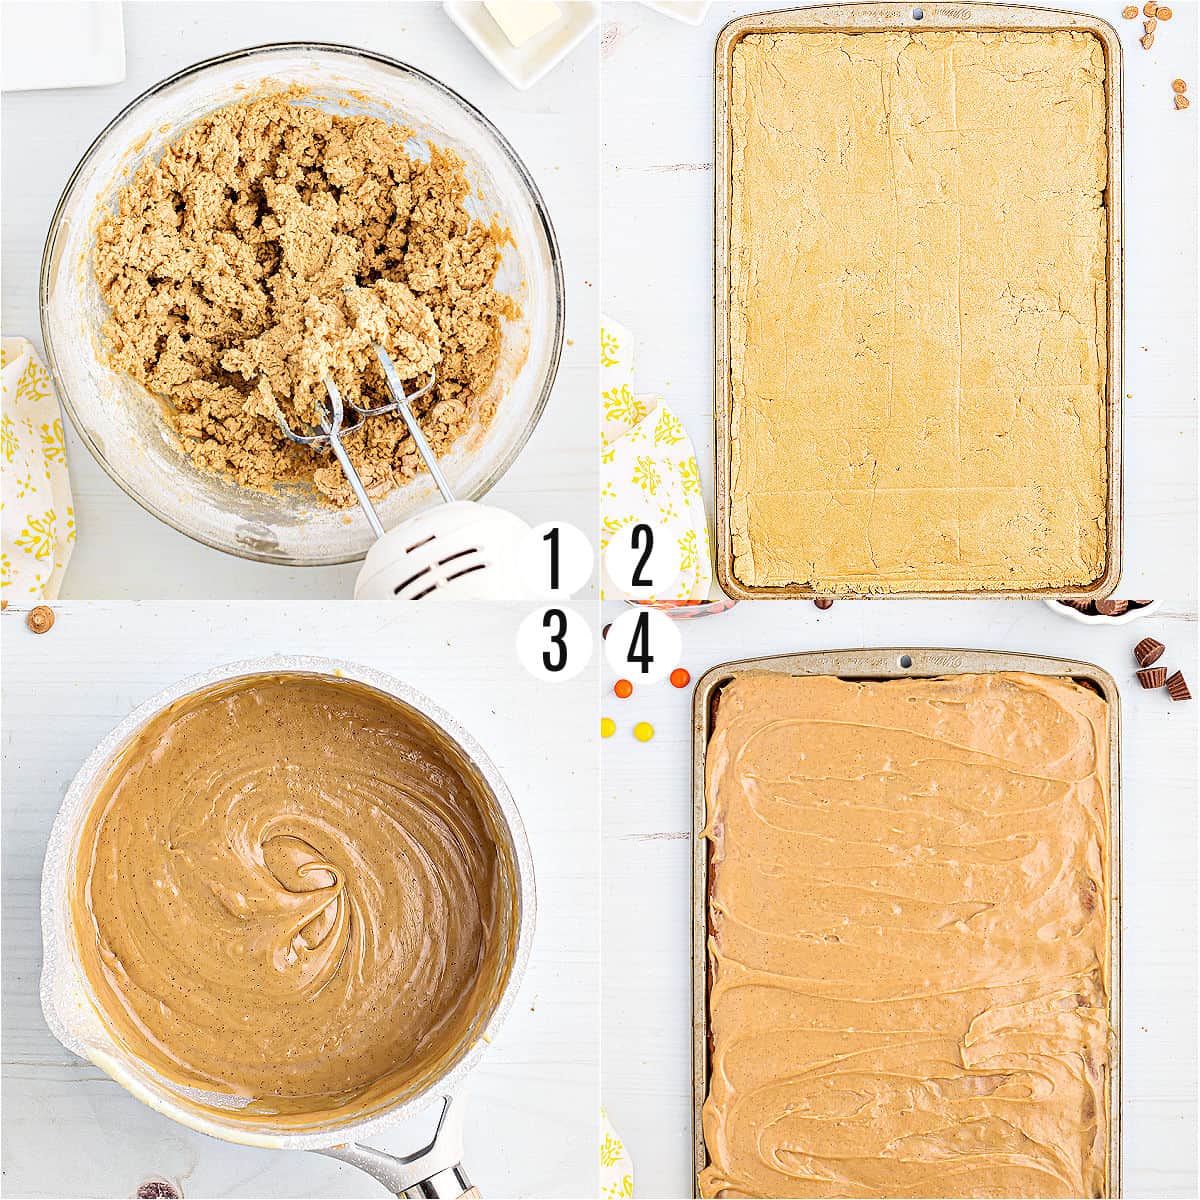 Step by step photos showing how to make peanut butter cookie bars.